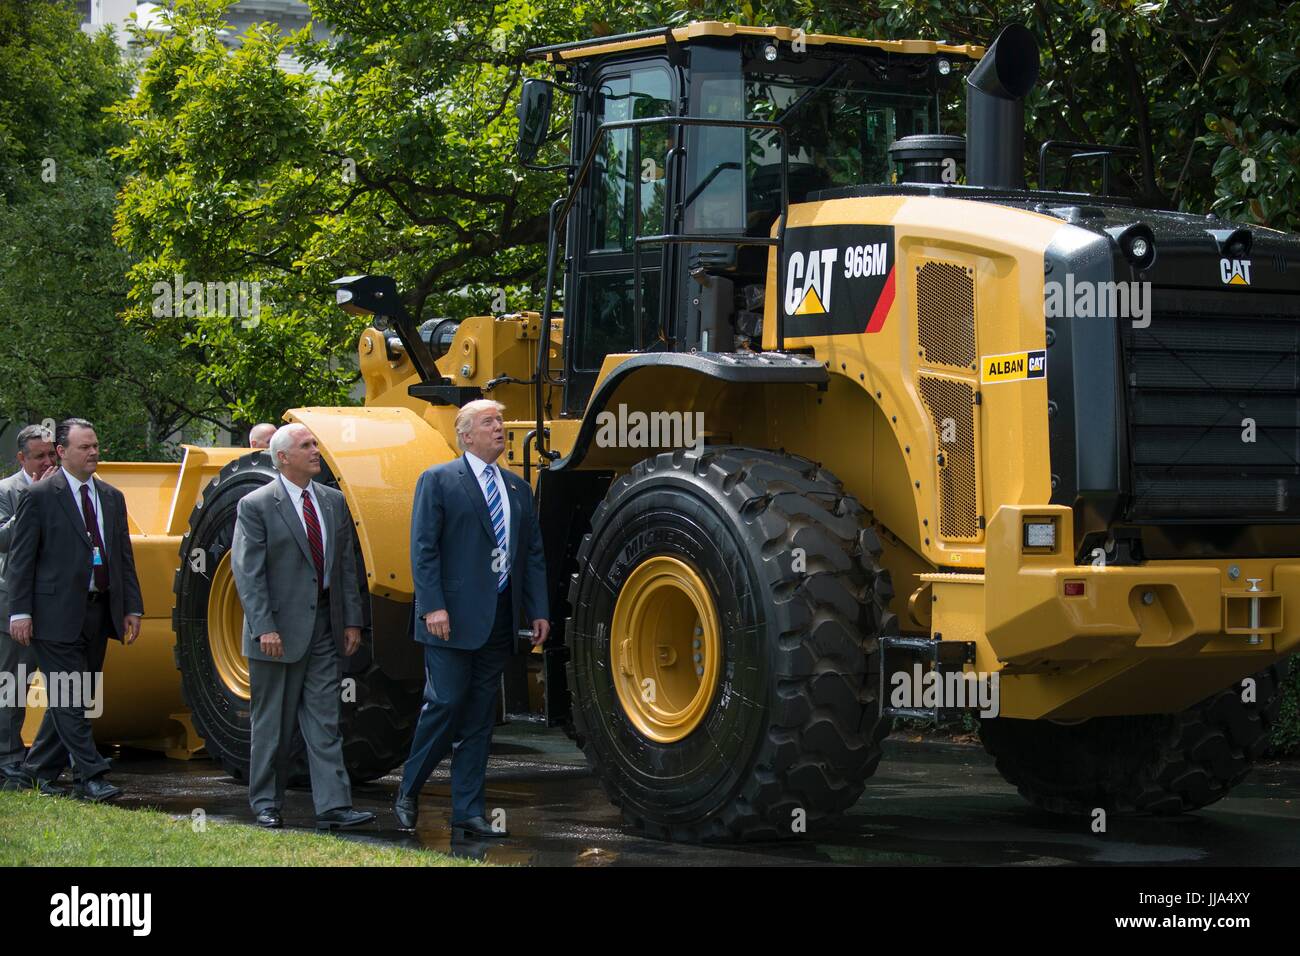 Washington, United States Of America. 17th July, 2017. U.S President Donald Trump and Vice President Mike Pence look up at a Caterpillar Large Wheel Loader construction front end loader during the Made in America Product Showcase on the South Lawn of the White House July 17, 2017 in Washington, DC. Credit: Planetpix/Alamy Live News Stock Photo